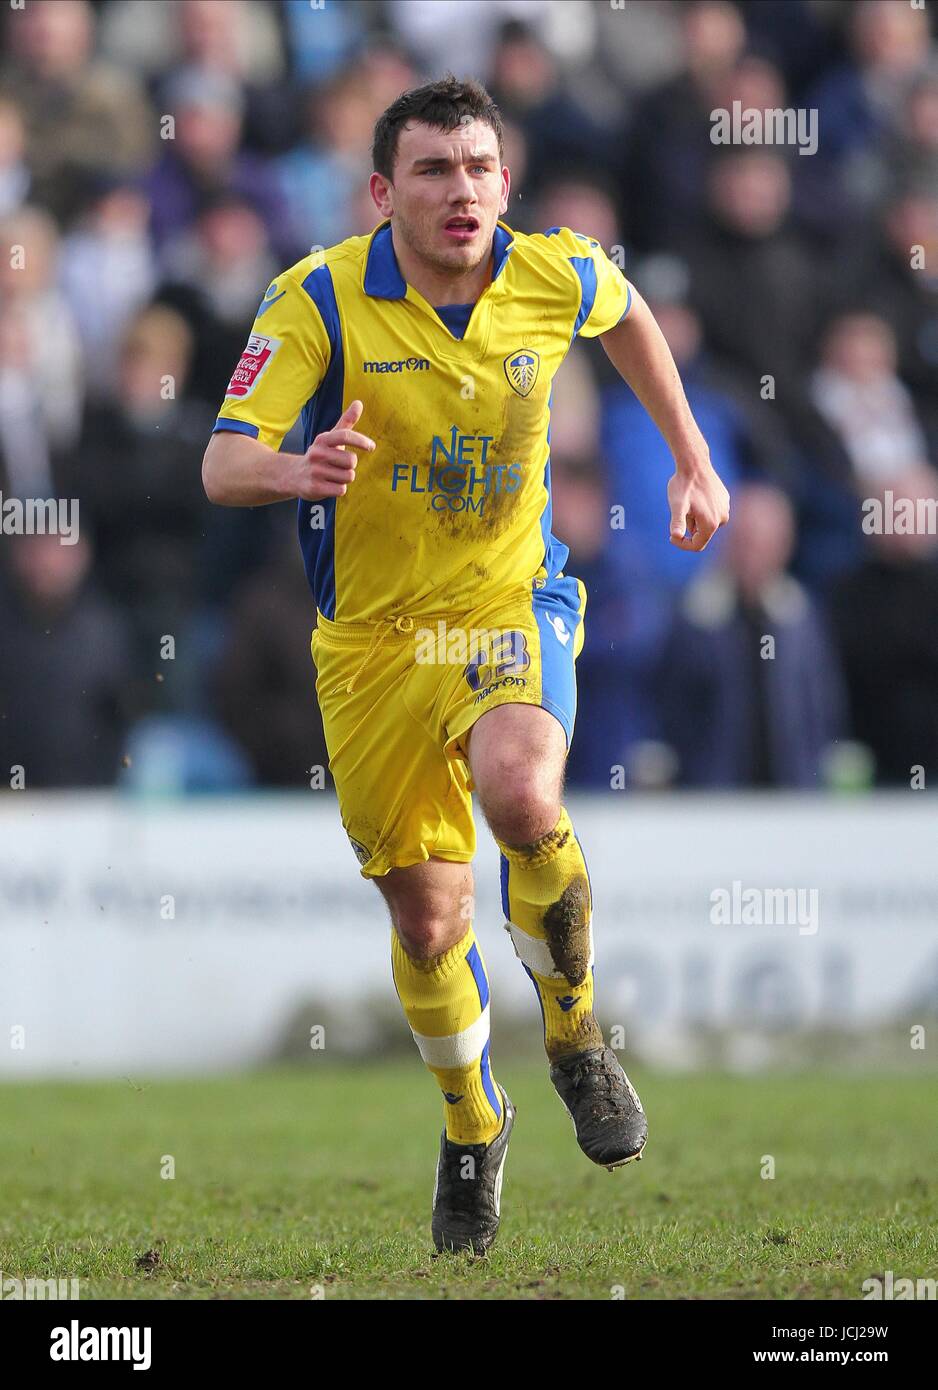 ROBERT SNODGRASS LEEDS UNITED FC STOCKPORT COUNTY V LEEDS UNITED EDGELEY PARK, STOCKPORT, ENGLAND 28 December 2009 GAB7508     WARNING! This Photograph May Only Be Used For Newspaper And/Or Magazine Editorial Purposes. May Not Be Used For, Internet/Online Usage Nor For Publications Involving 1 player, 1 Club Or 1 Competition, Without Written Authorisation From Football DataCo Ltd. For Any Queries, Please Contact Football DataCo Ltd on +44 (0) 207 864 9121 Stock Photo